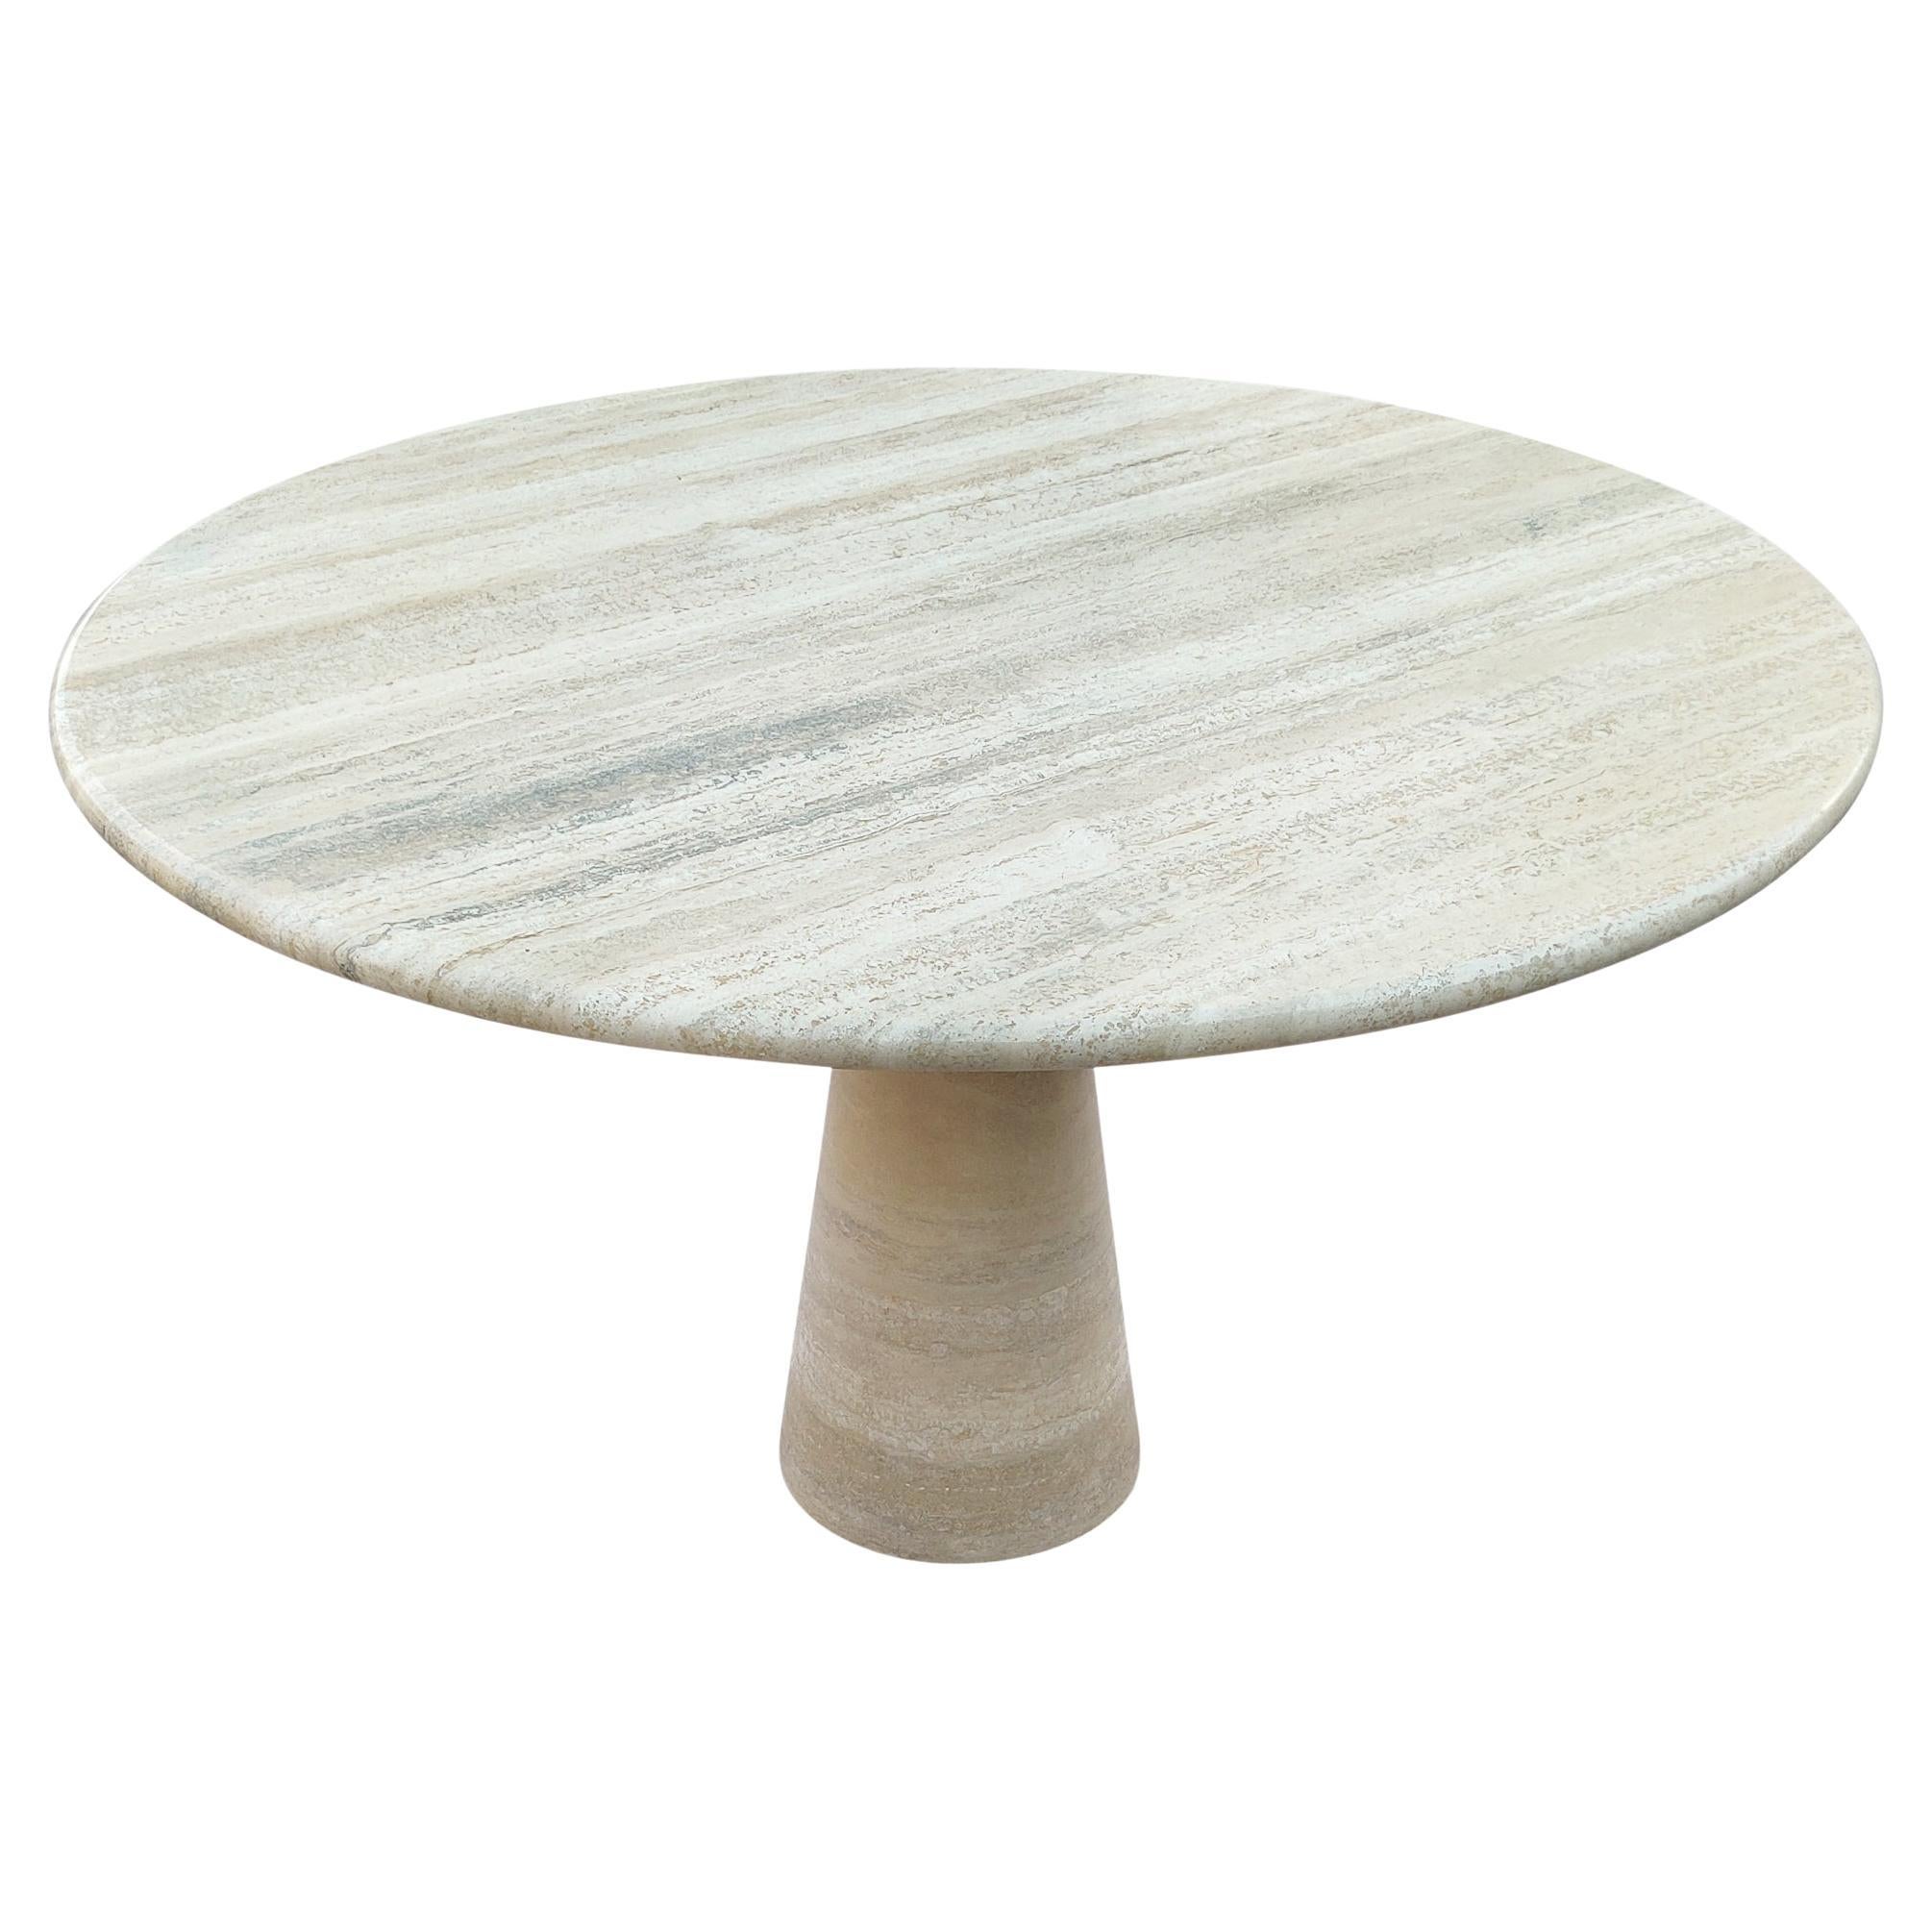 Angelo Mangiarotti Attributed Round Travertine Pedestal Dining Table For Sale